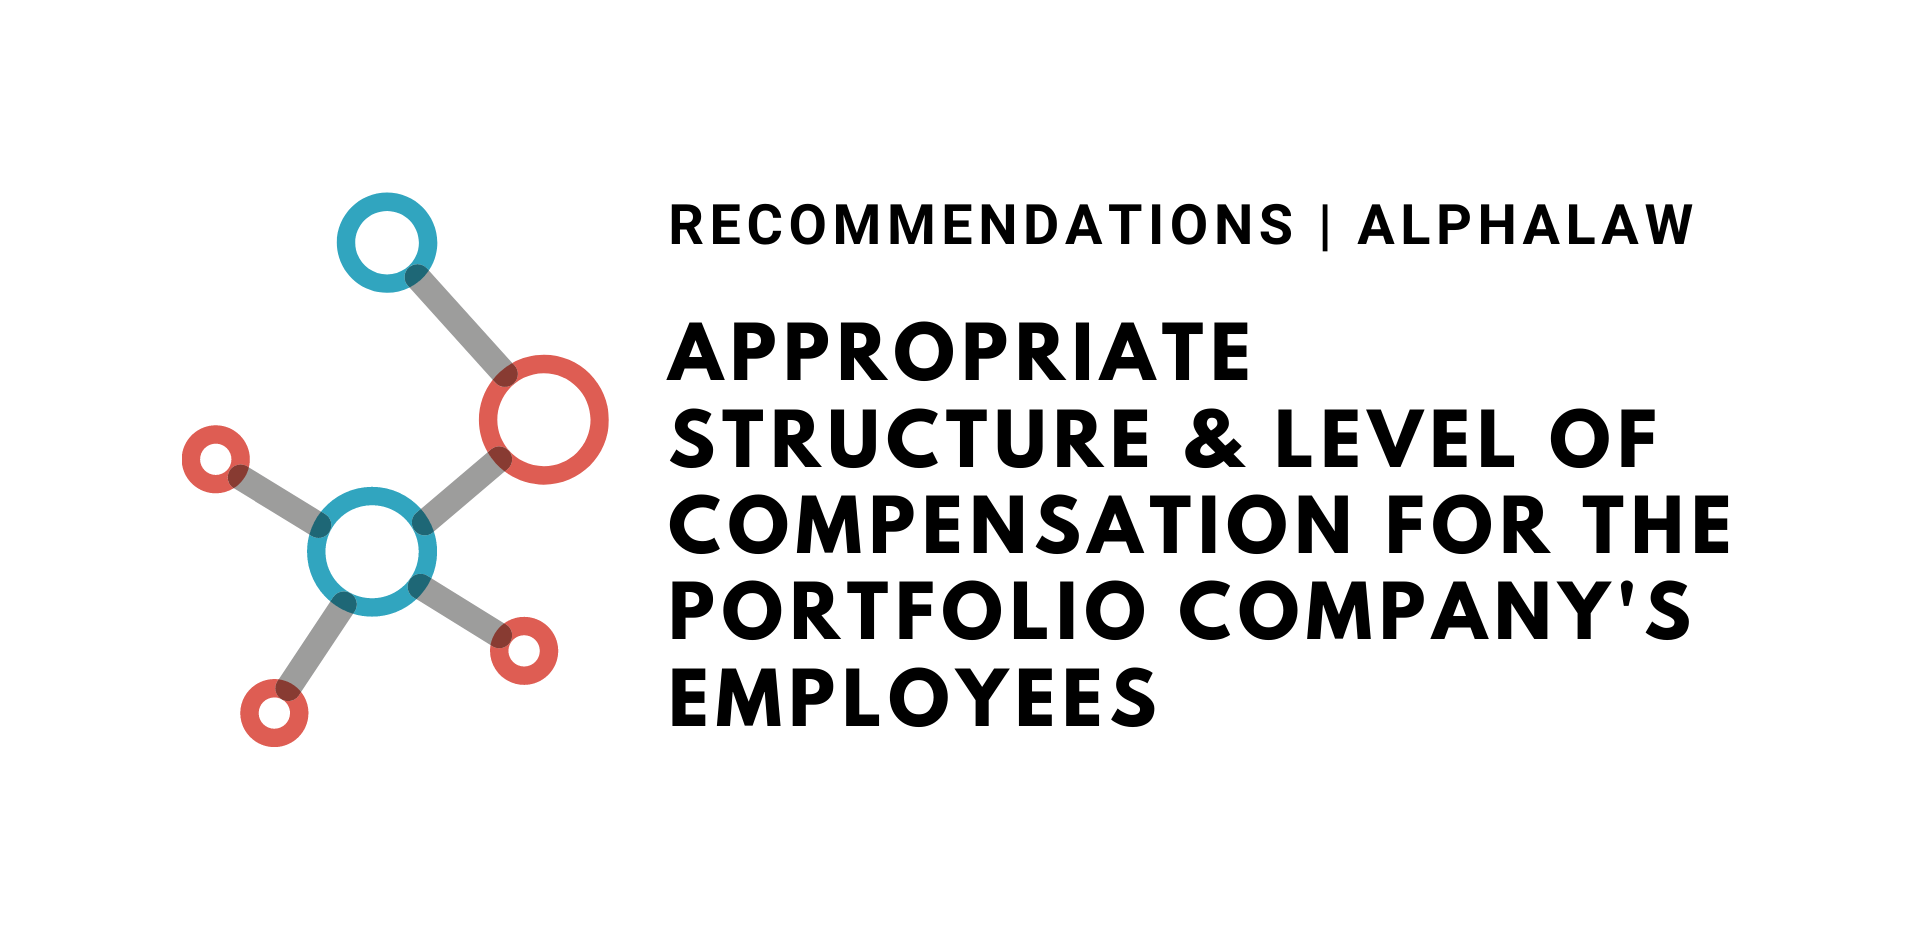 Appropriate Structure & Level of Compensation for the Portfolio Company's Employees